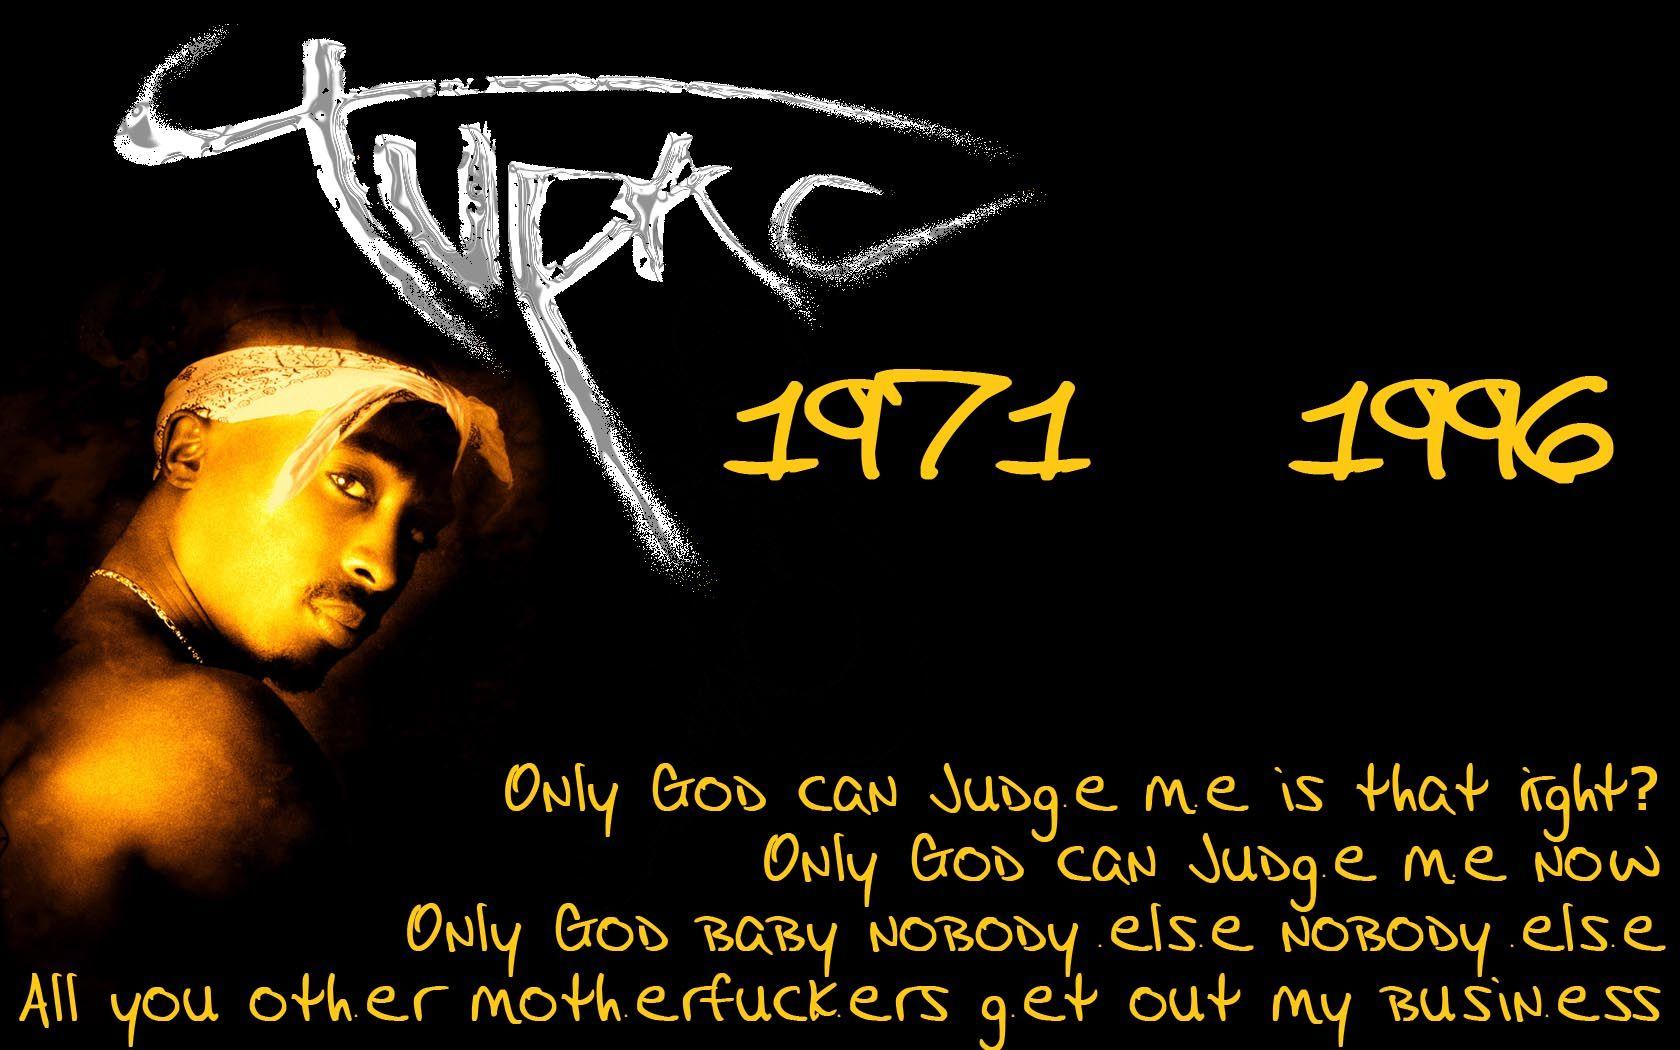 Best Tupac Quotes about Love and Life to Inspire You